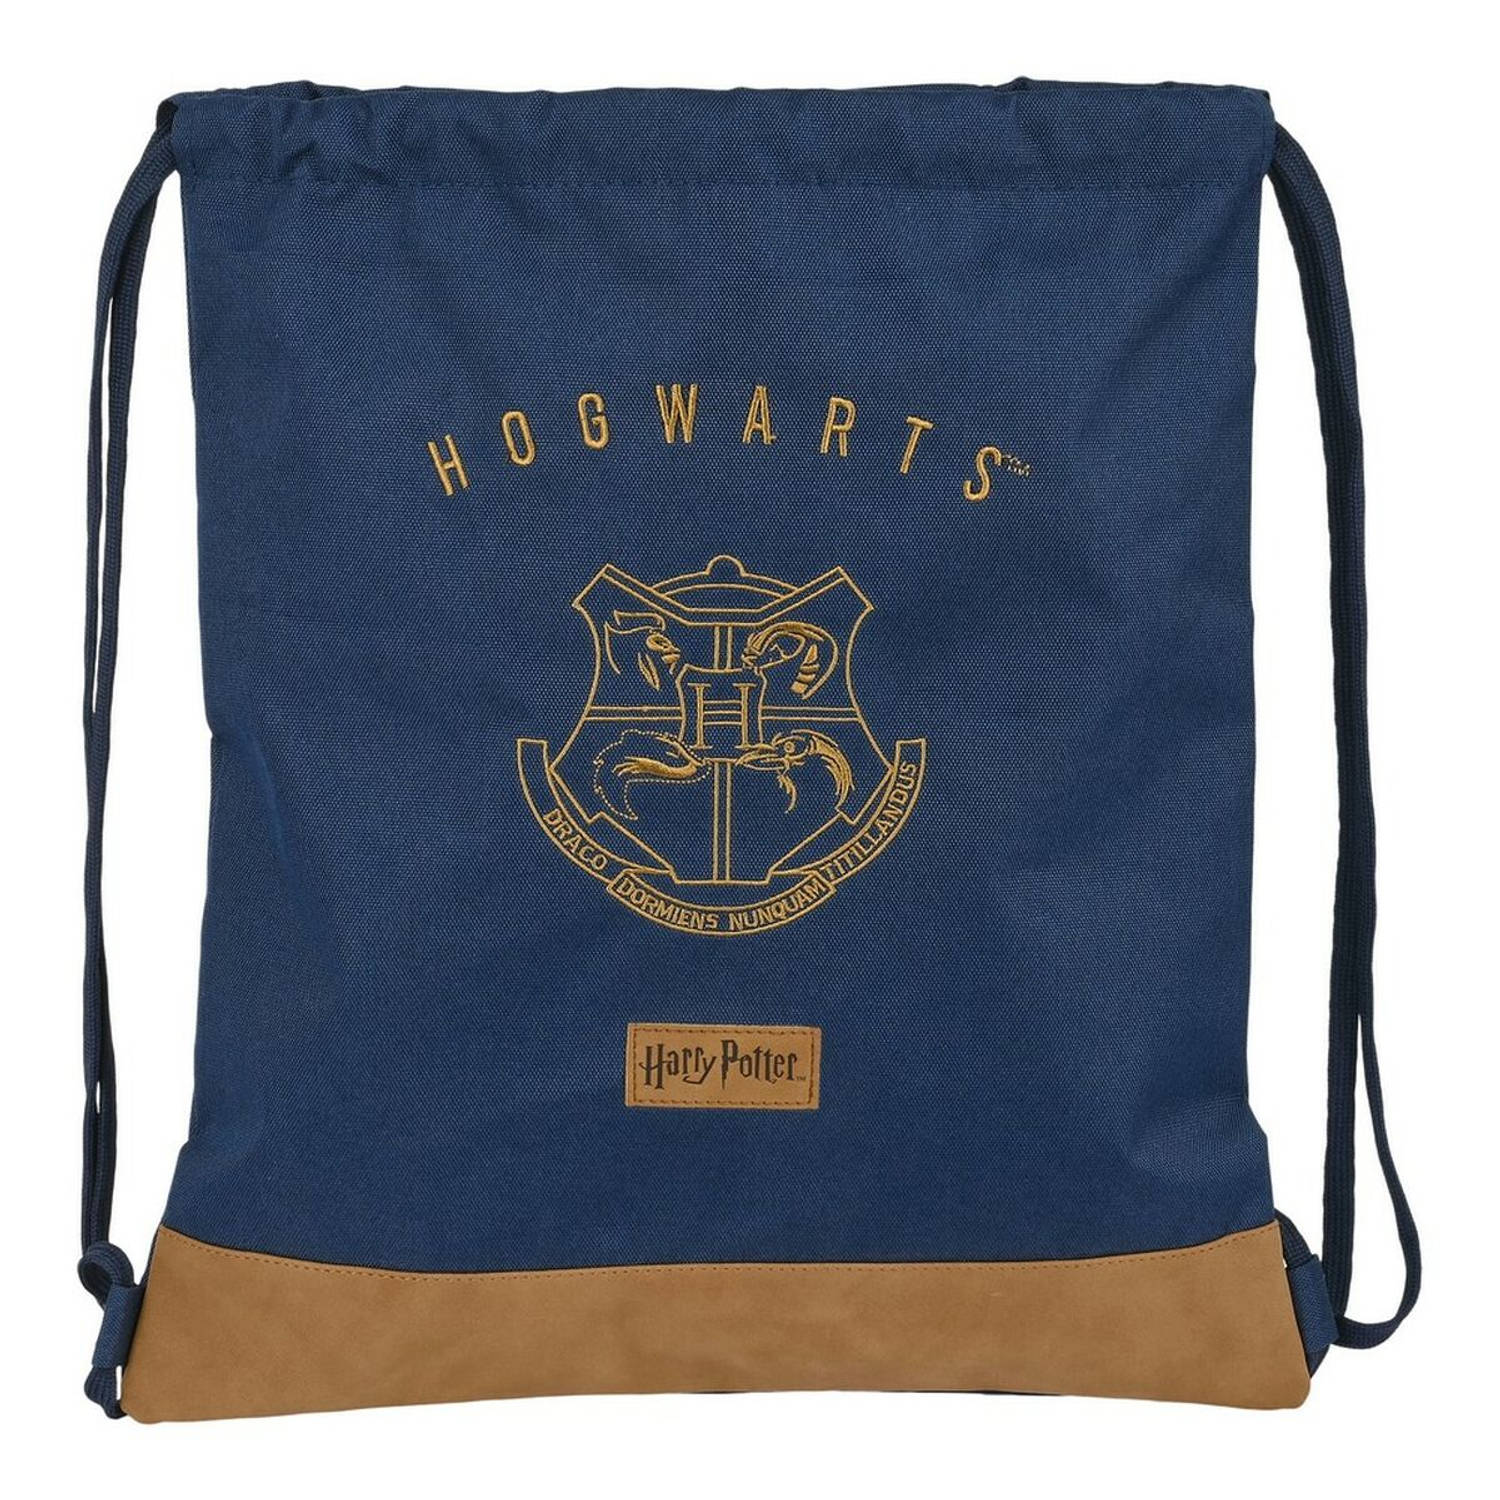 Harry Potter Gymbag Magical - 40 x 35 cm - Polyester